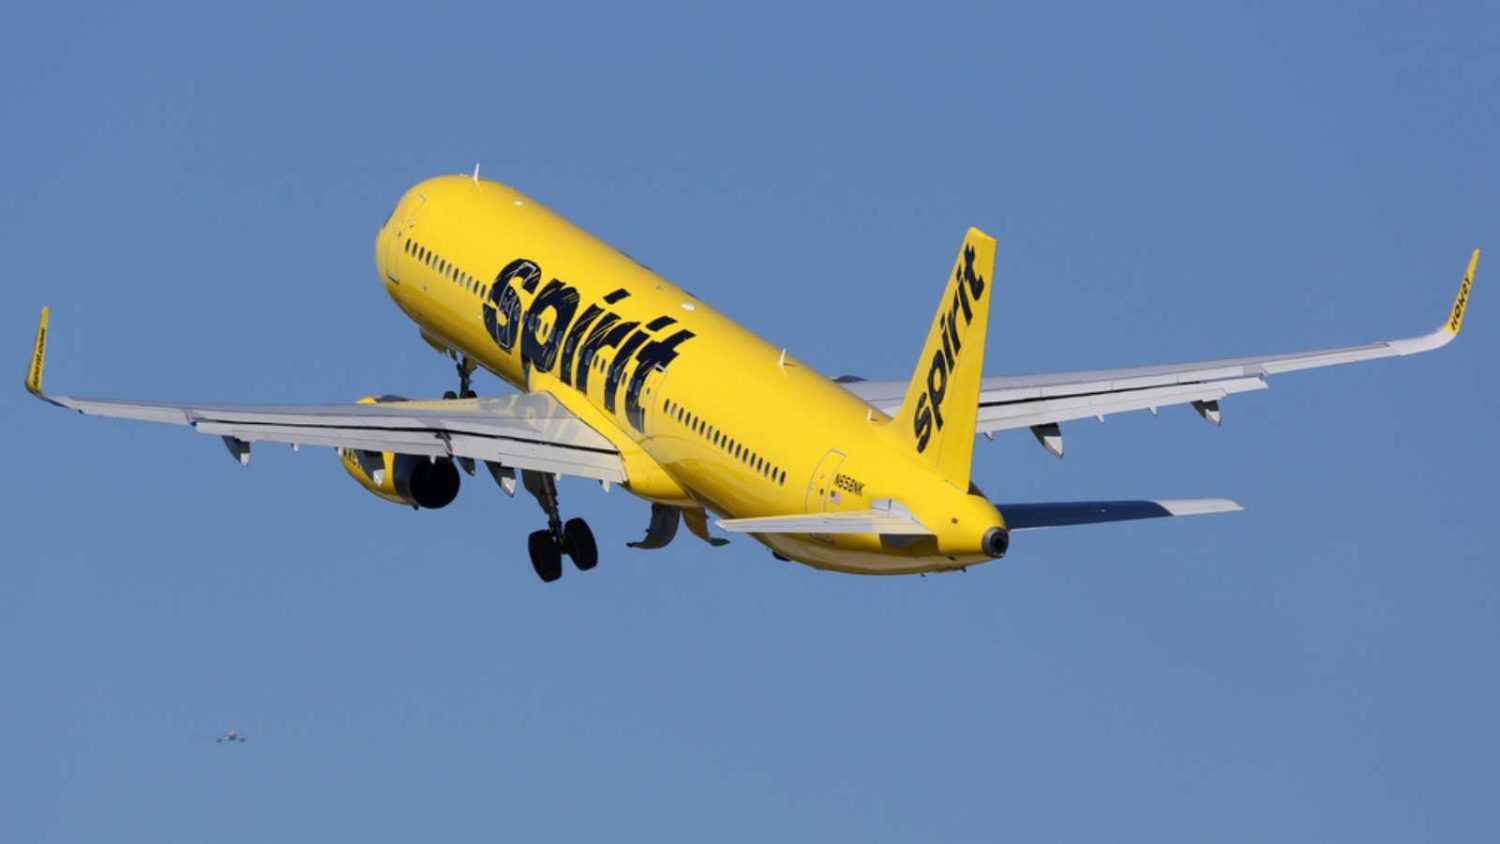 FORT LAUDERDALE, FL - FEBRUARY 17: Spirit Airlines Airbus A321 taking off on February 17, 2016 in Fort Lauderdale, FL. Spirit Airlines is an American airline with its headquarters in Fort Lauderdale.